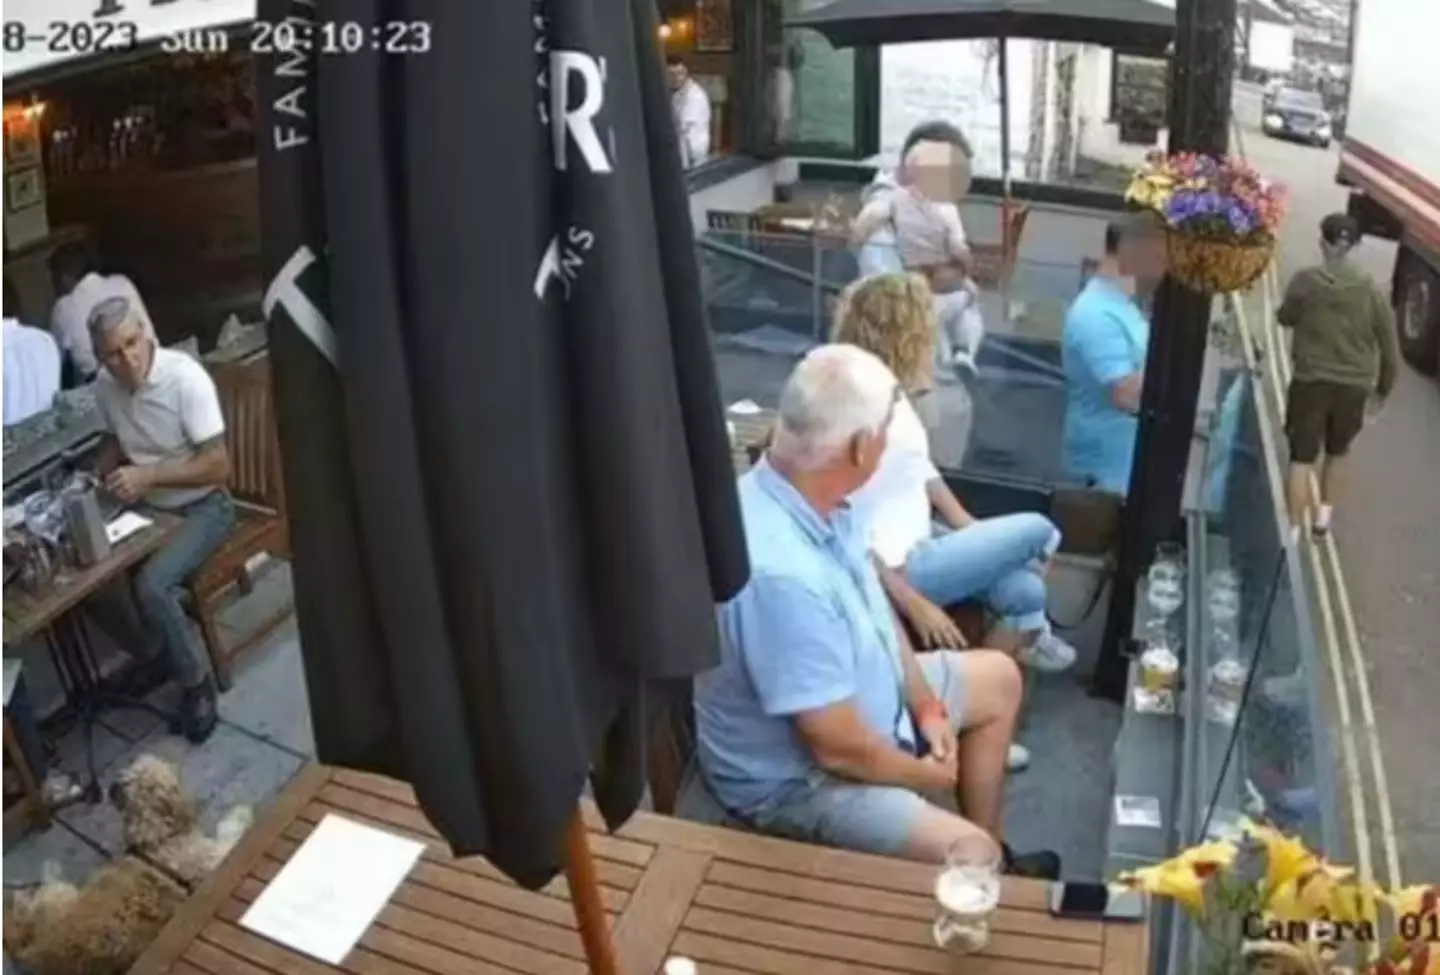 CCTV footage shows two men leaving the pub.